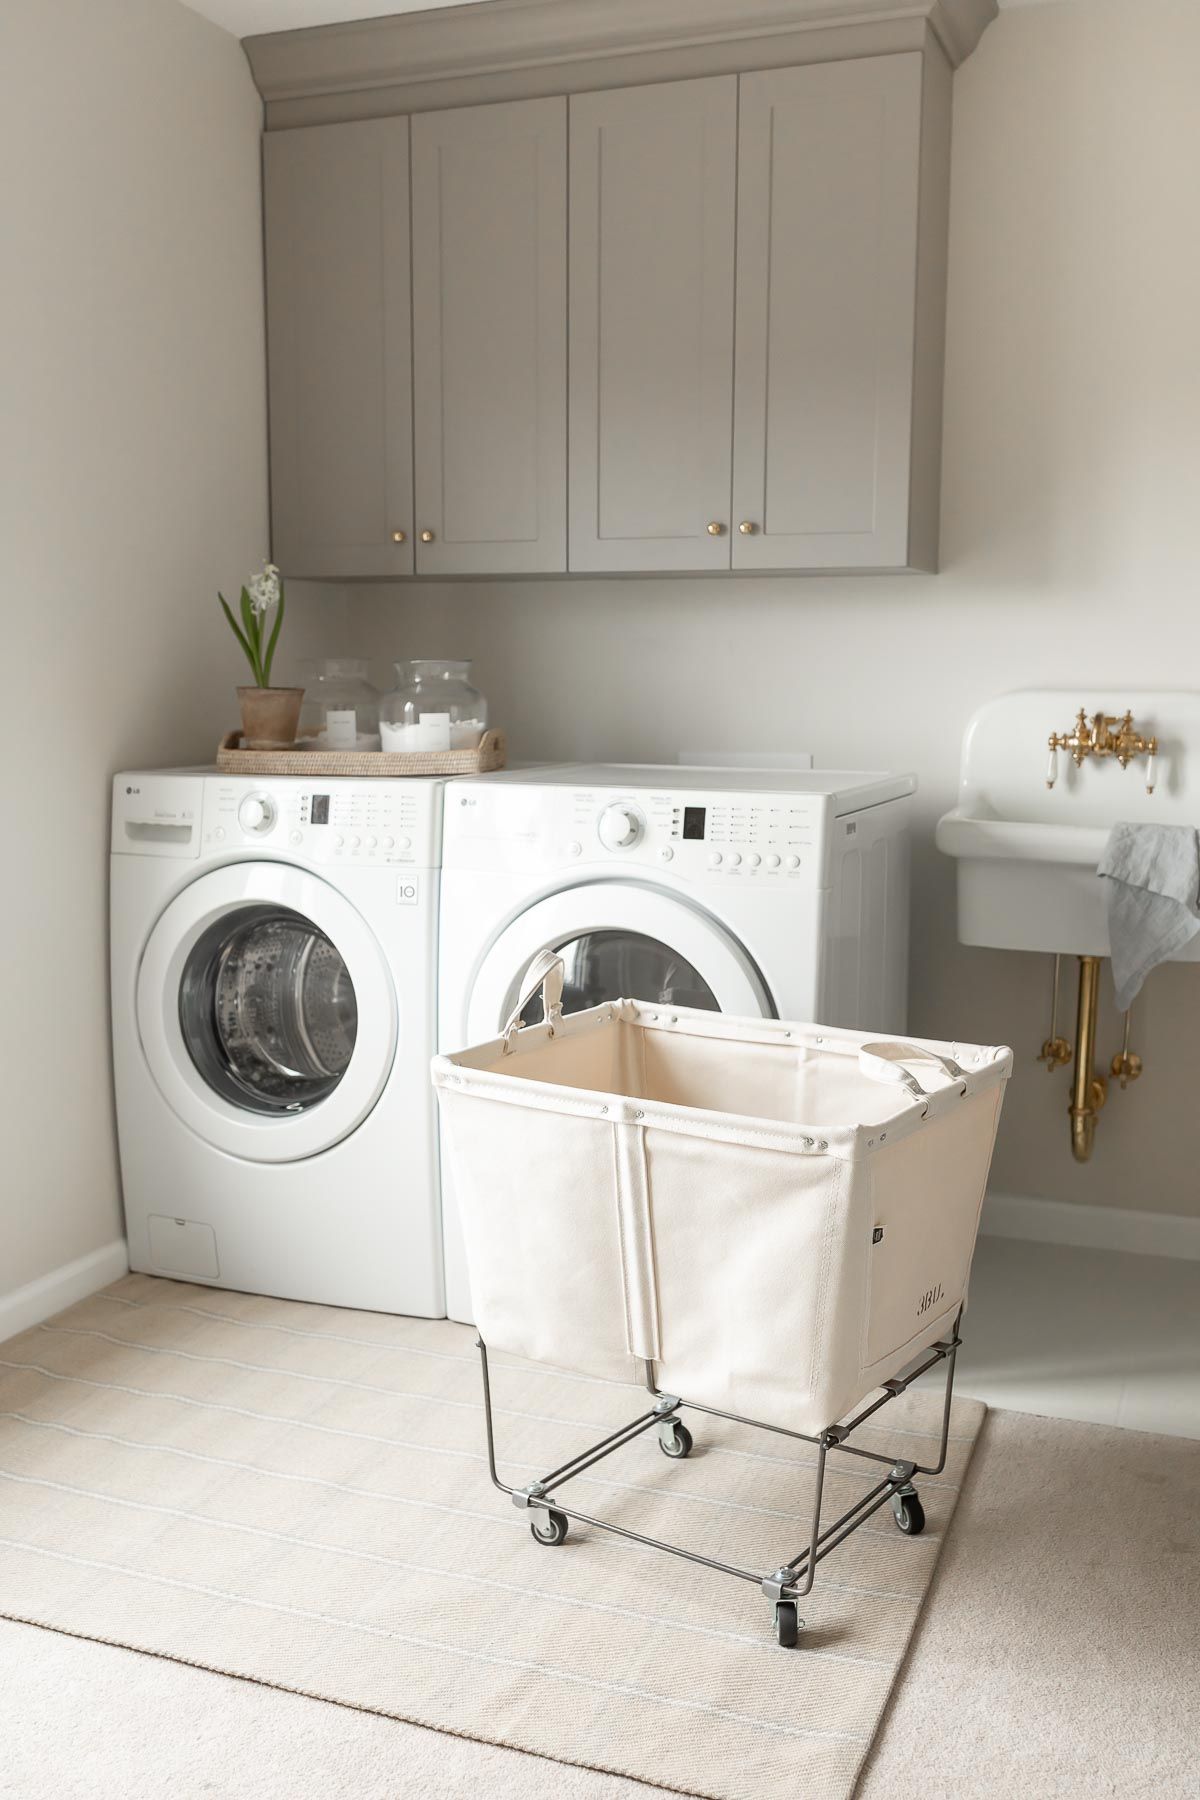 A laundry room with gray cabinets, a white washer and dryer, and a beige rug on carpet flooring.